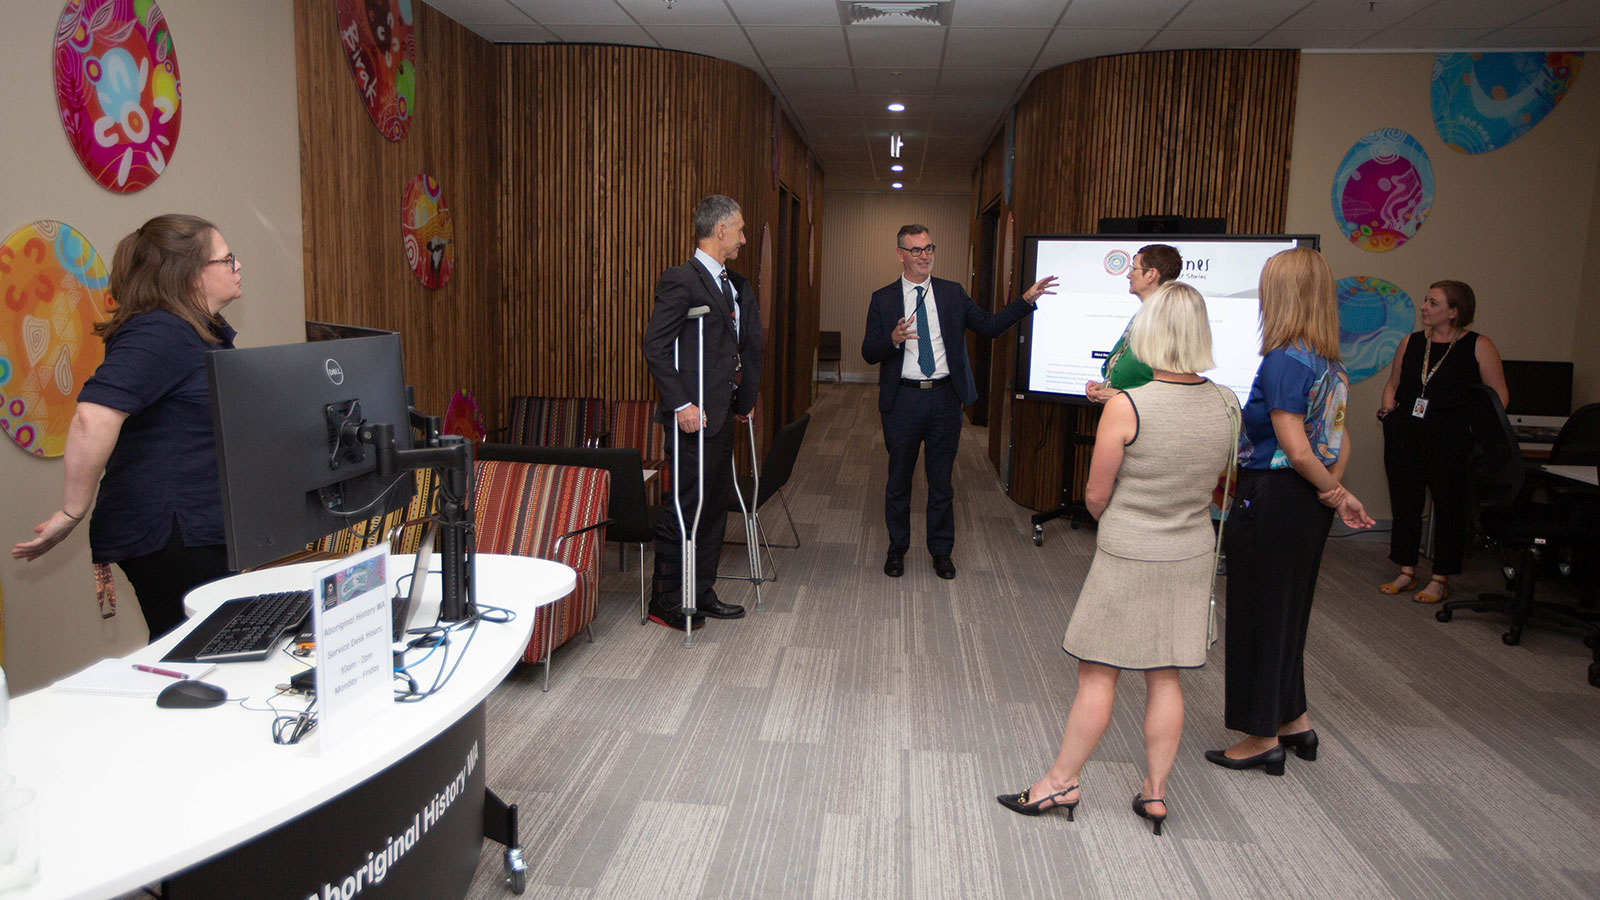 Minister Buti visits the new space at the Aboriginal History Western Australia (AHWA) unit, and speaks with staff